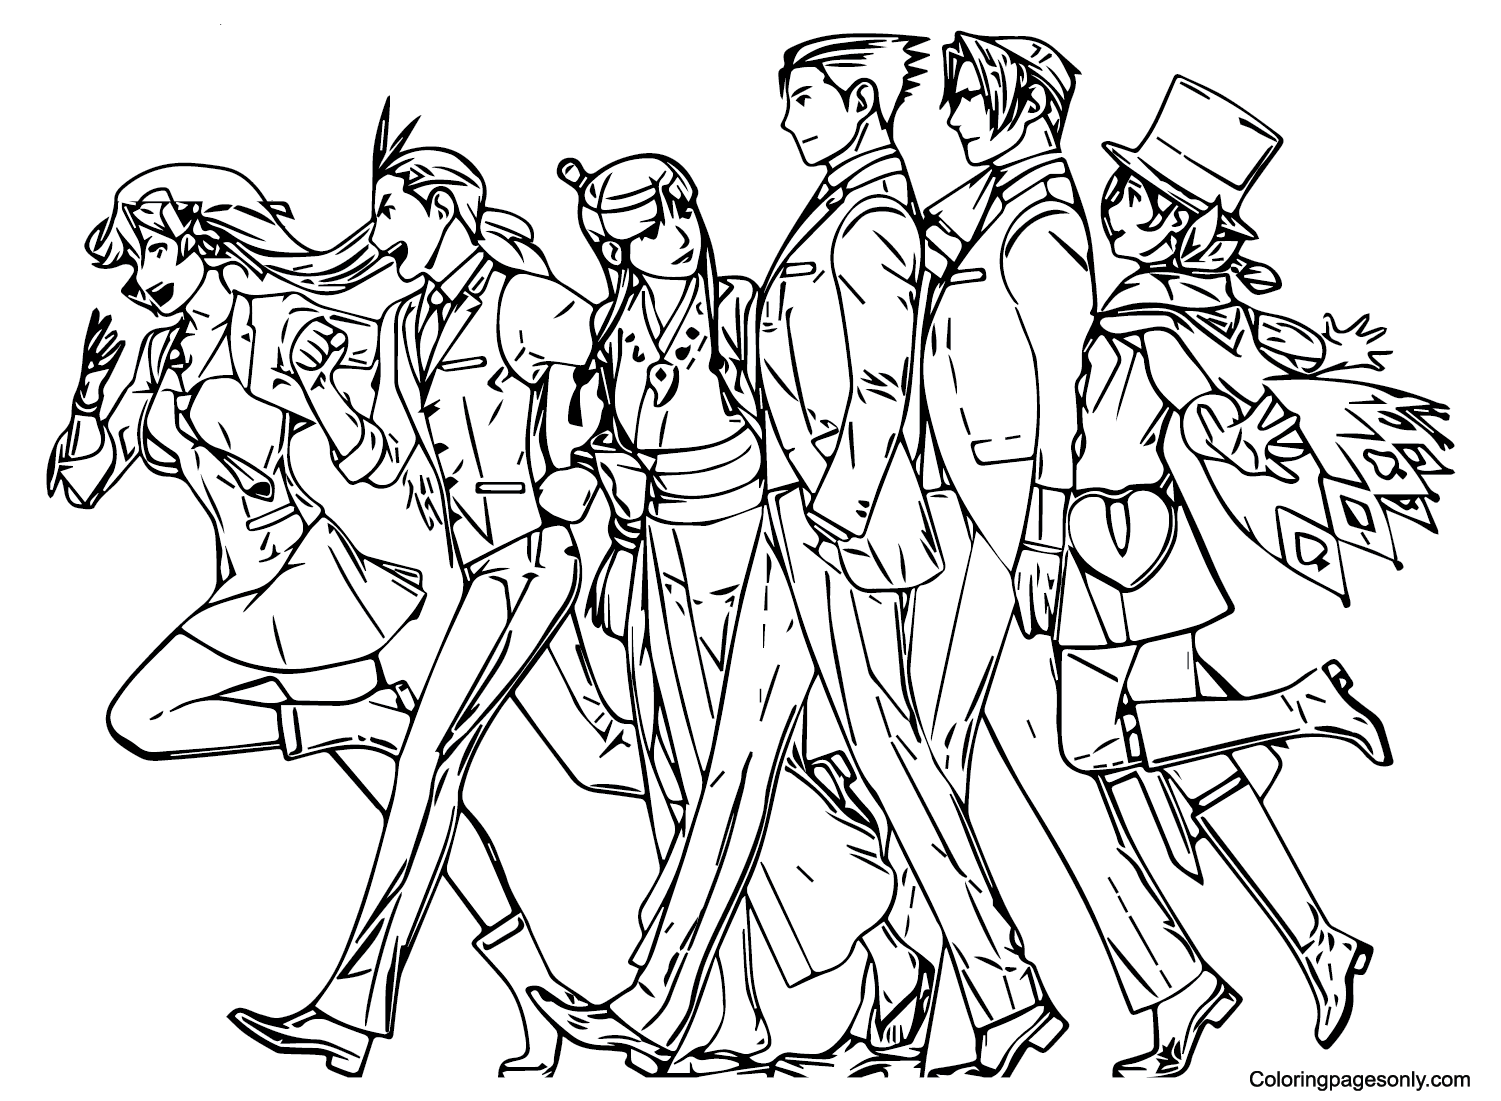 Ace Attorney-personages uit Ace Attorney